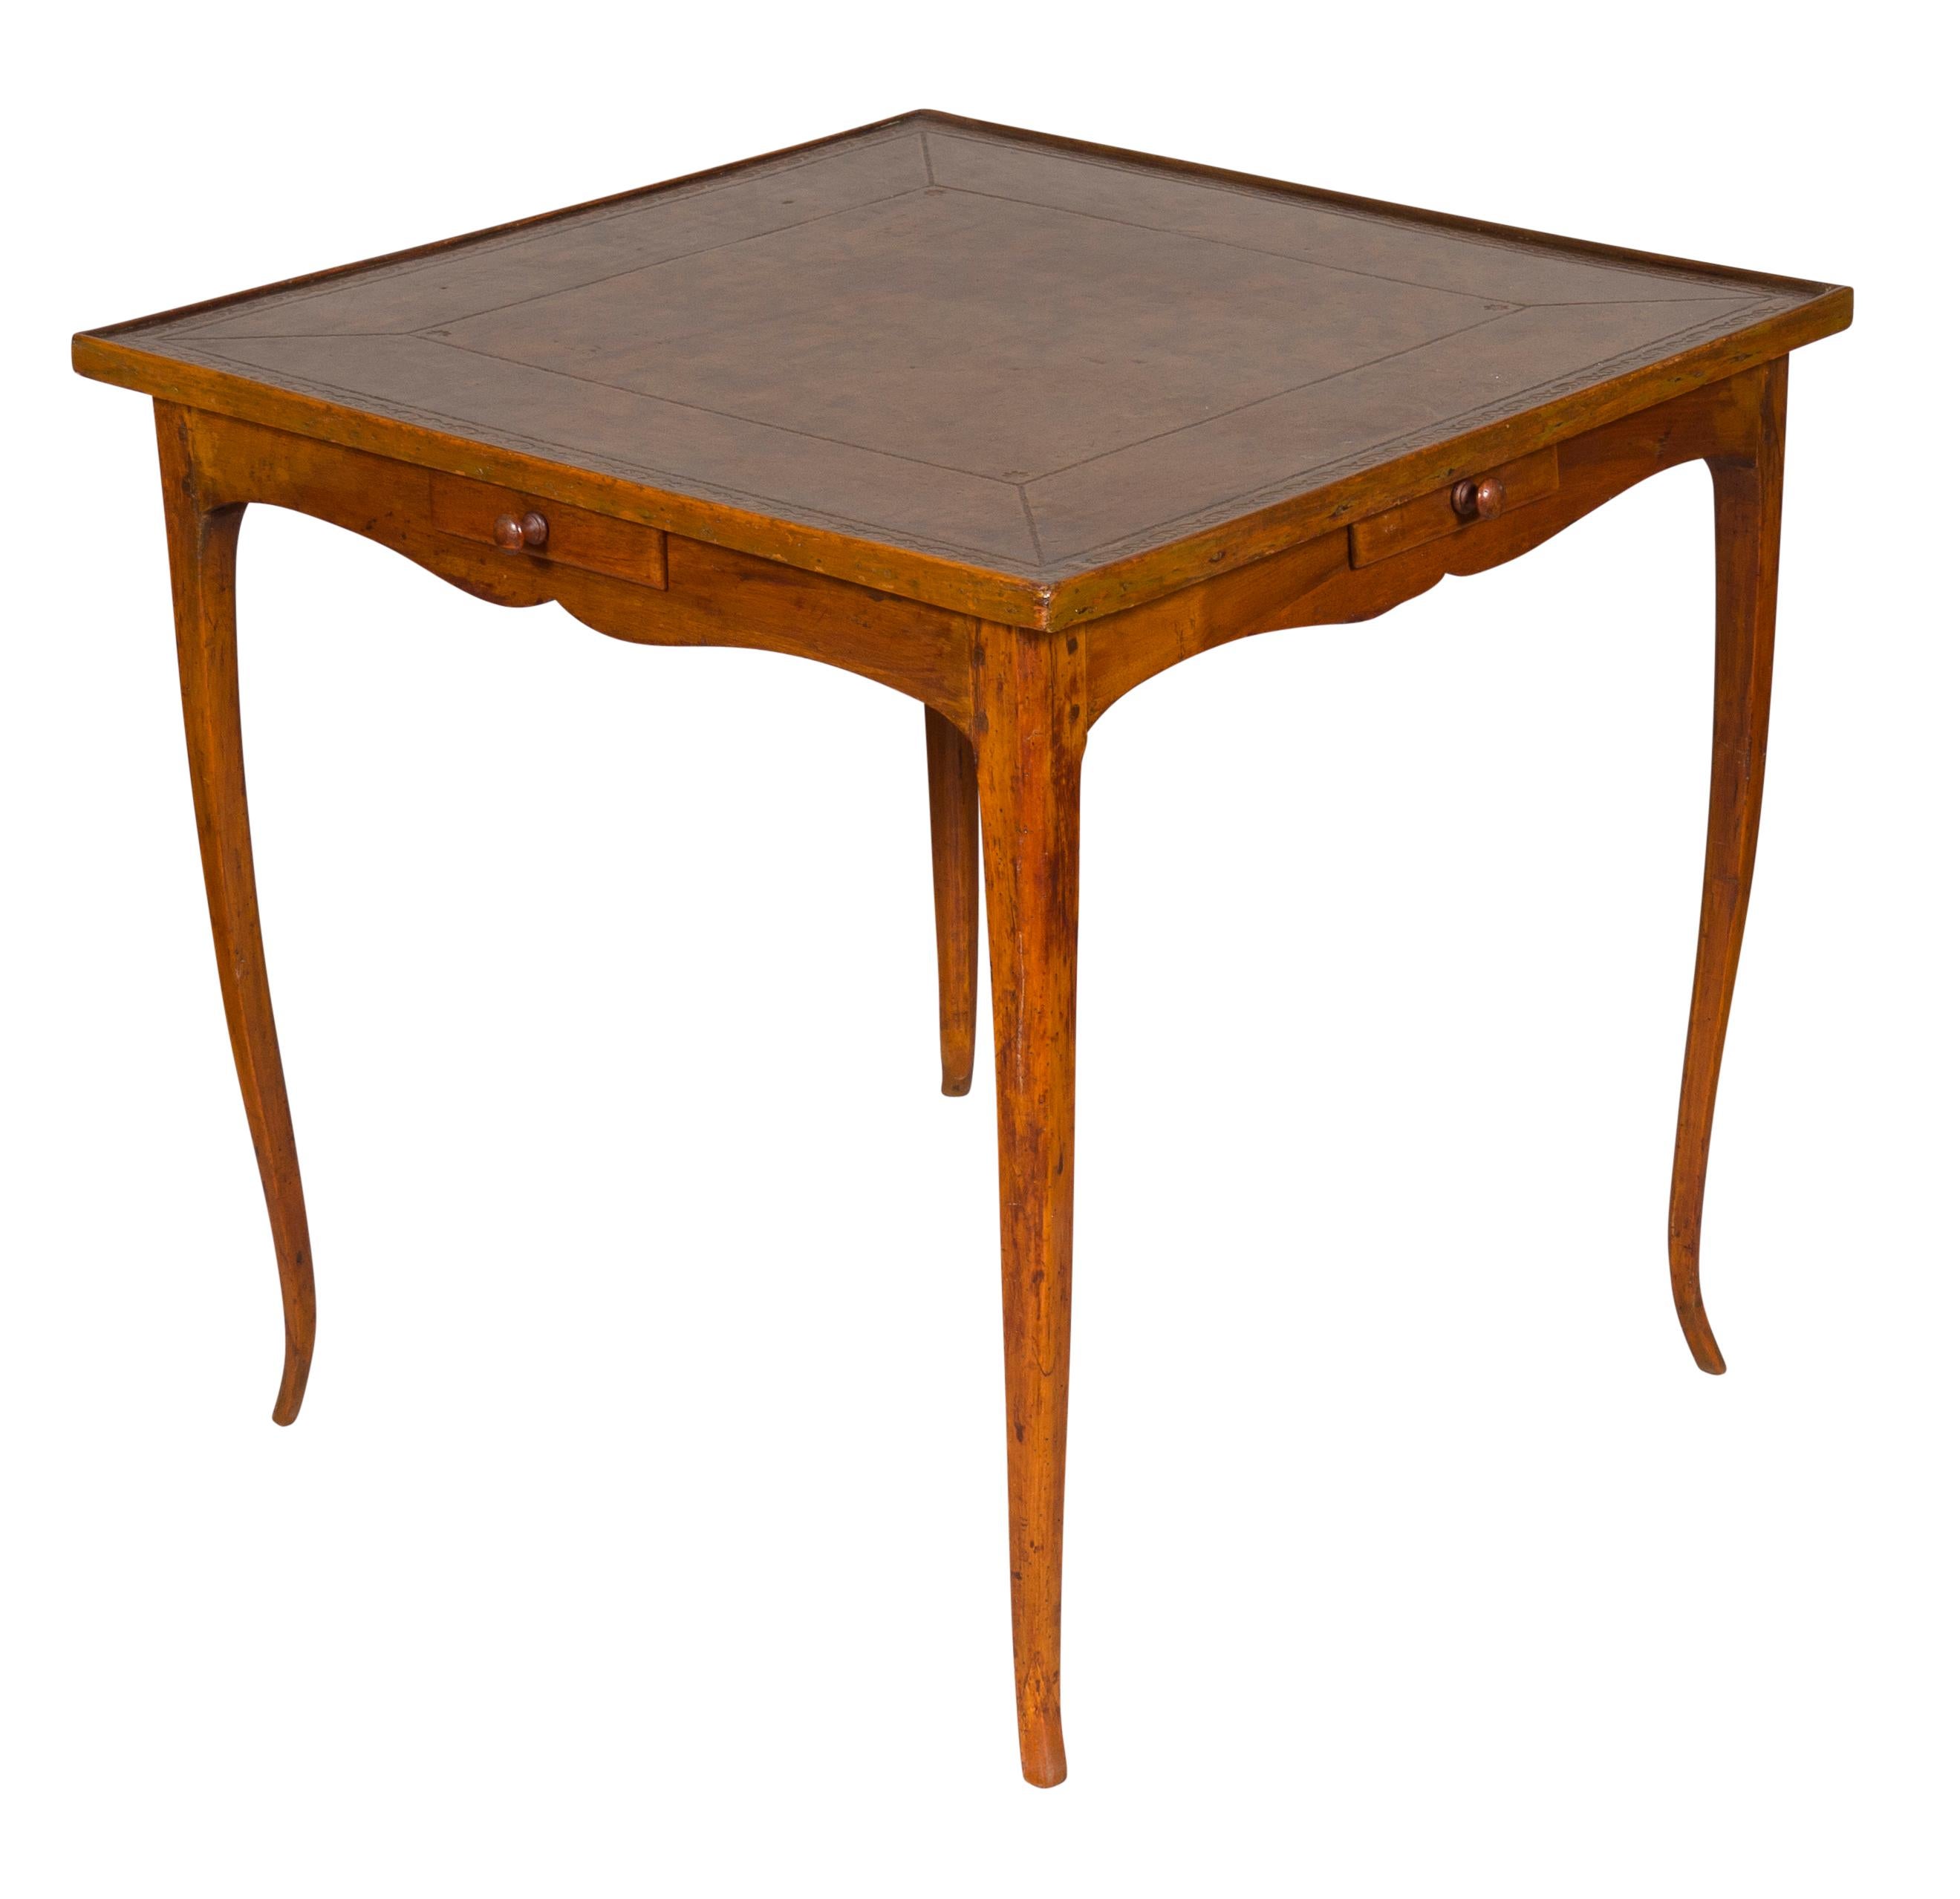 Square top with tooled brown leather over a shaped apron with four drawers, raised on cabriole legs. 
Provenance; Sophie H. Gimbel.